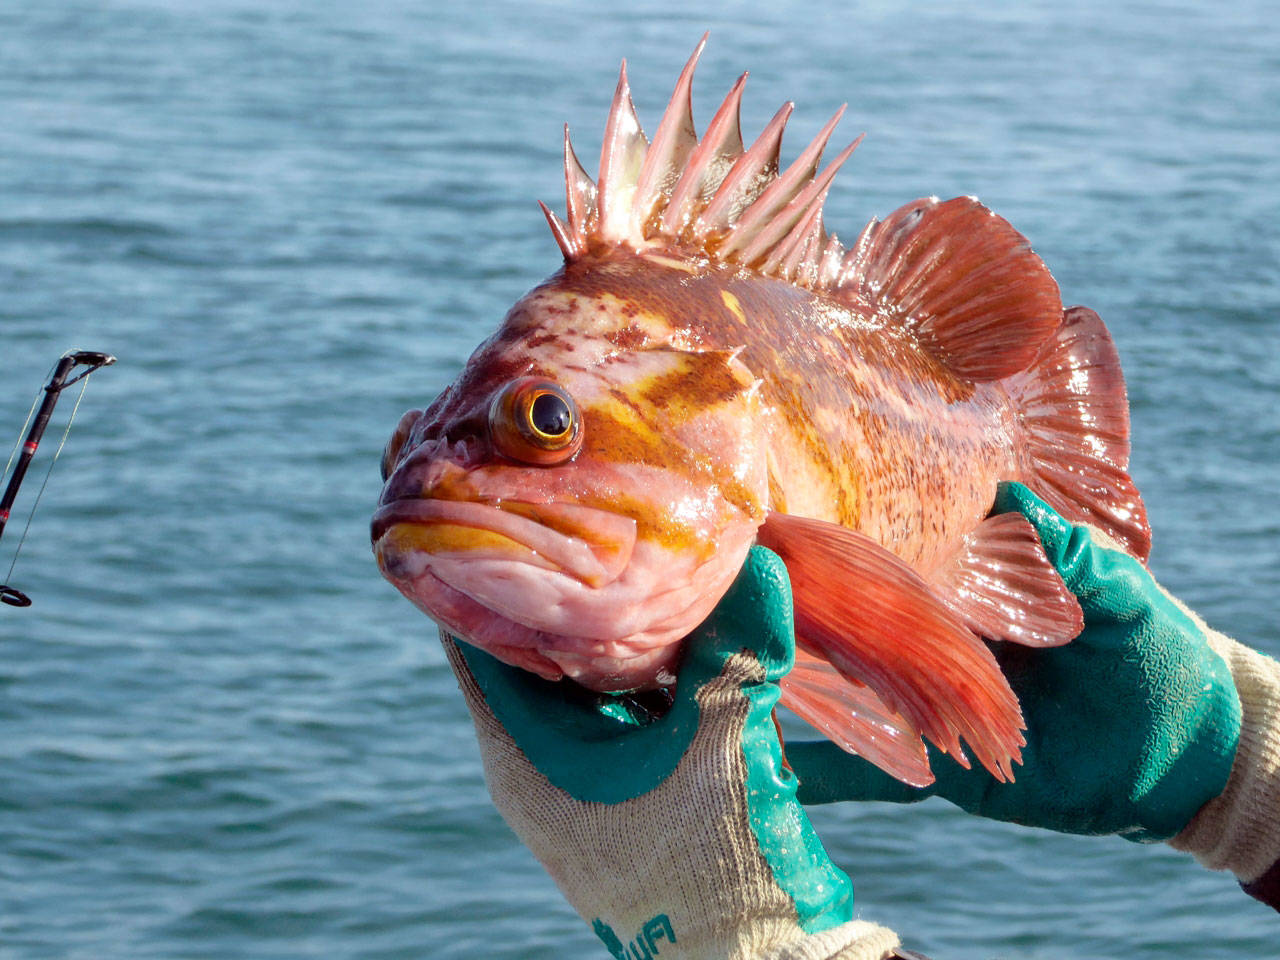 A copper rockfish — its eyes distended due to the pressure change when it was pulled up from a depth of 250 feet — is among the creatures in “Homewaters: A Human and Natural History of Puget Sound.” Author David B. Williams will discuss his research on the North Olympic Peninsula in a free online program Tuesday evening. (Photo courtesy of David B. Williams)